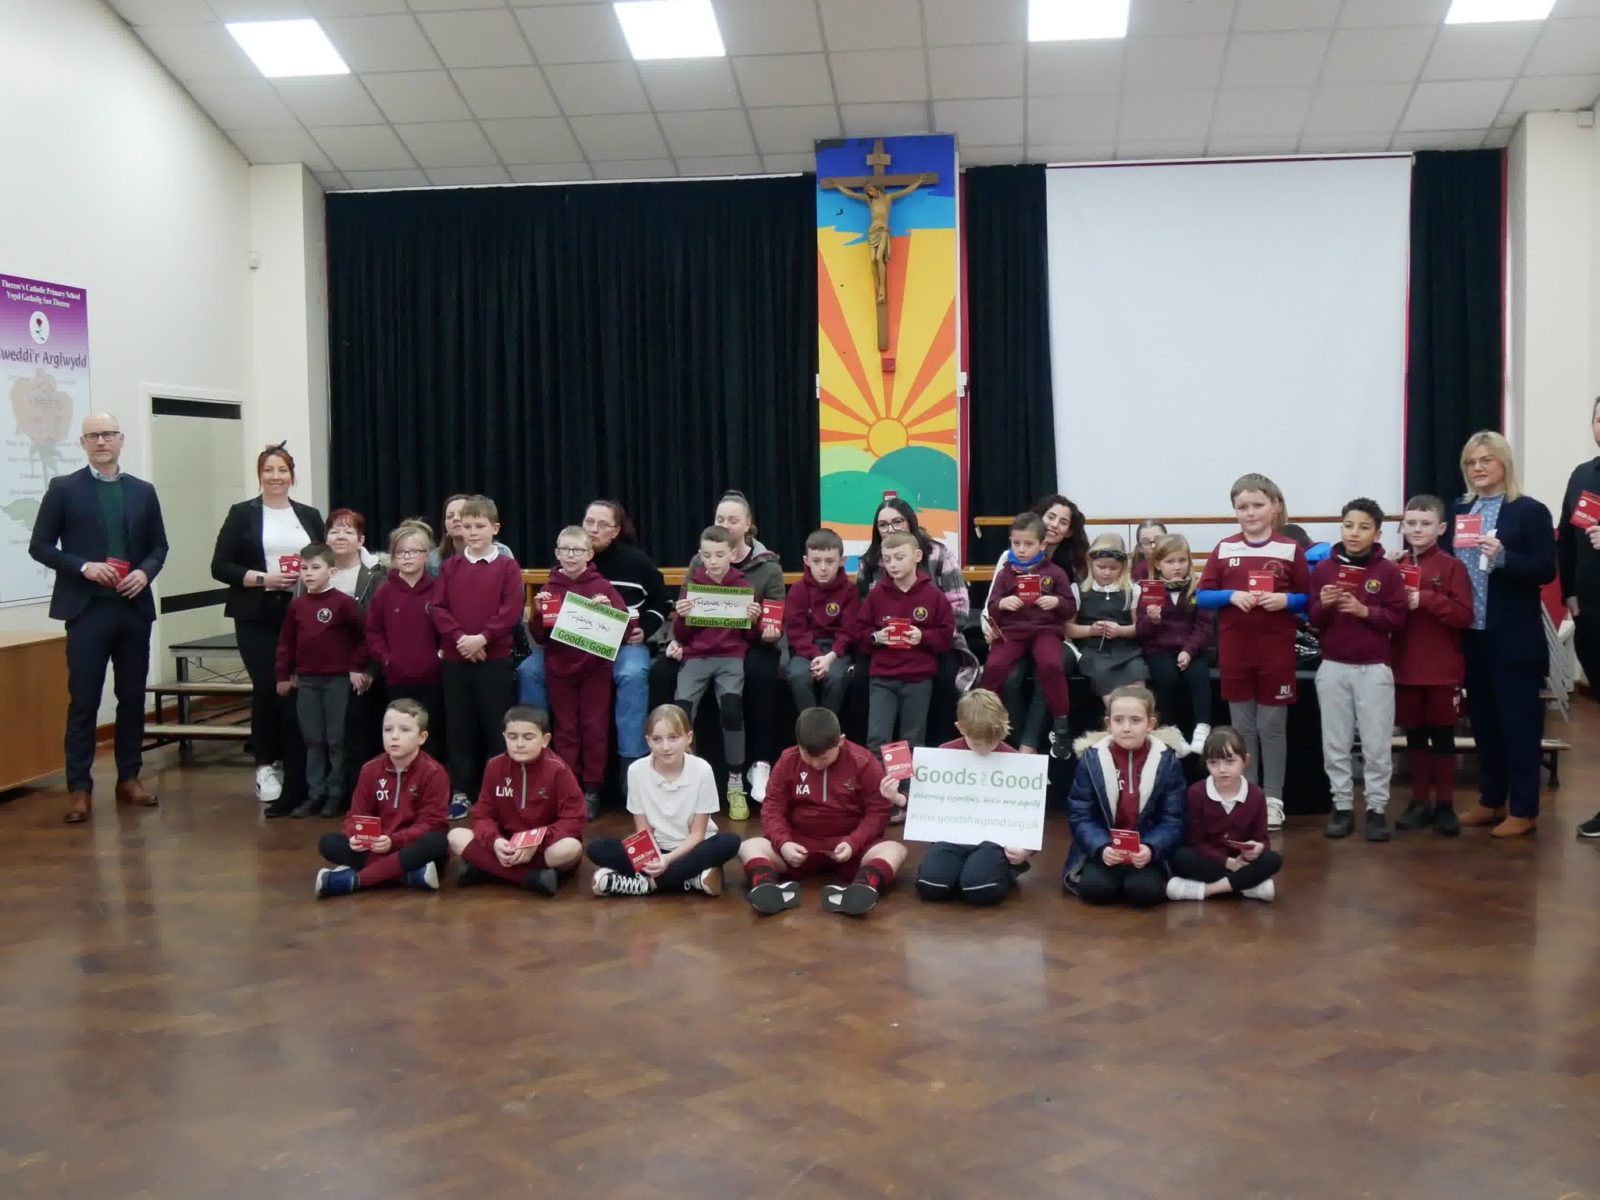 School pupils and their parents posing with goods that have been given to them by Goods for Good, The parents are sitting on a stage and the children sit on the floor in front of them. Stephen Kinnock MP stands on the left hand side of the photo. 